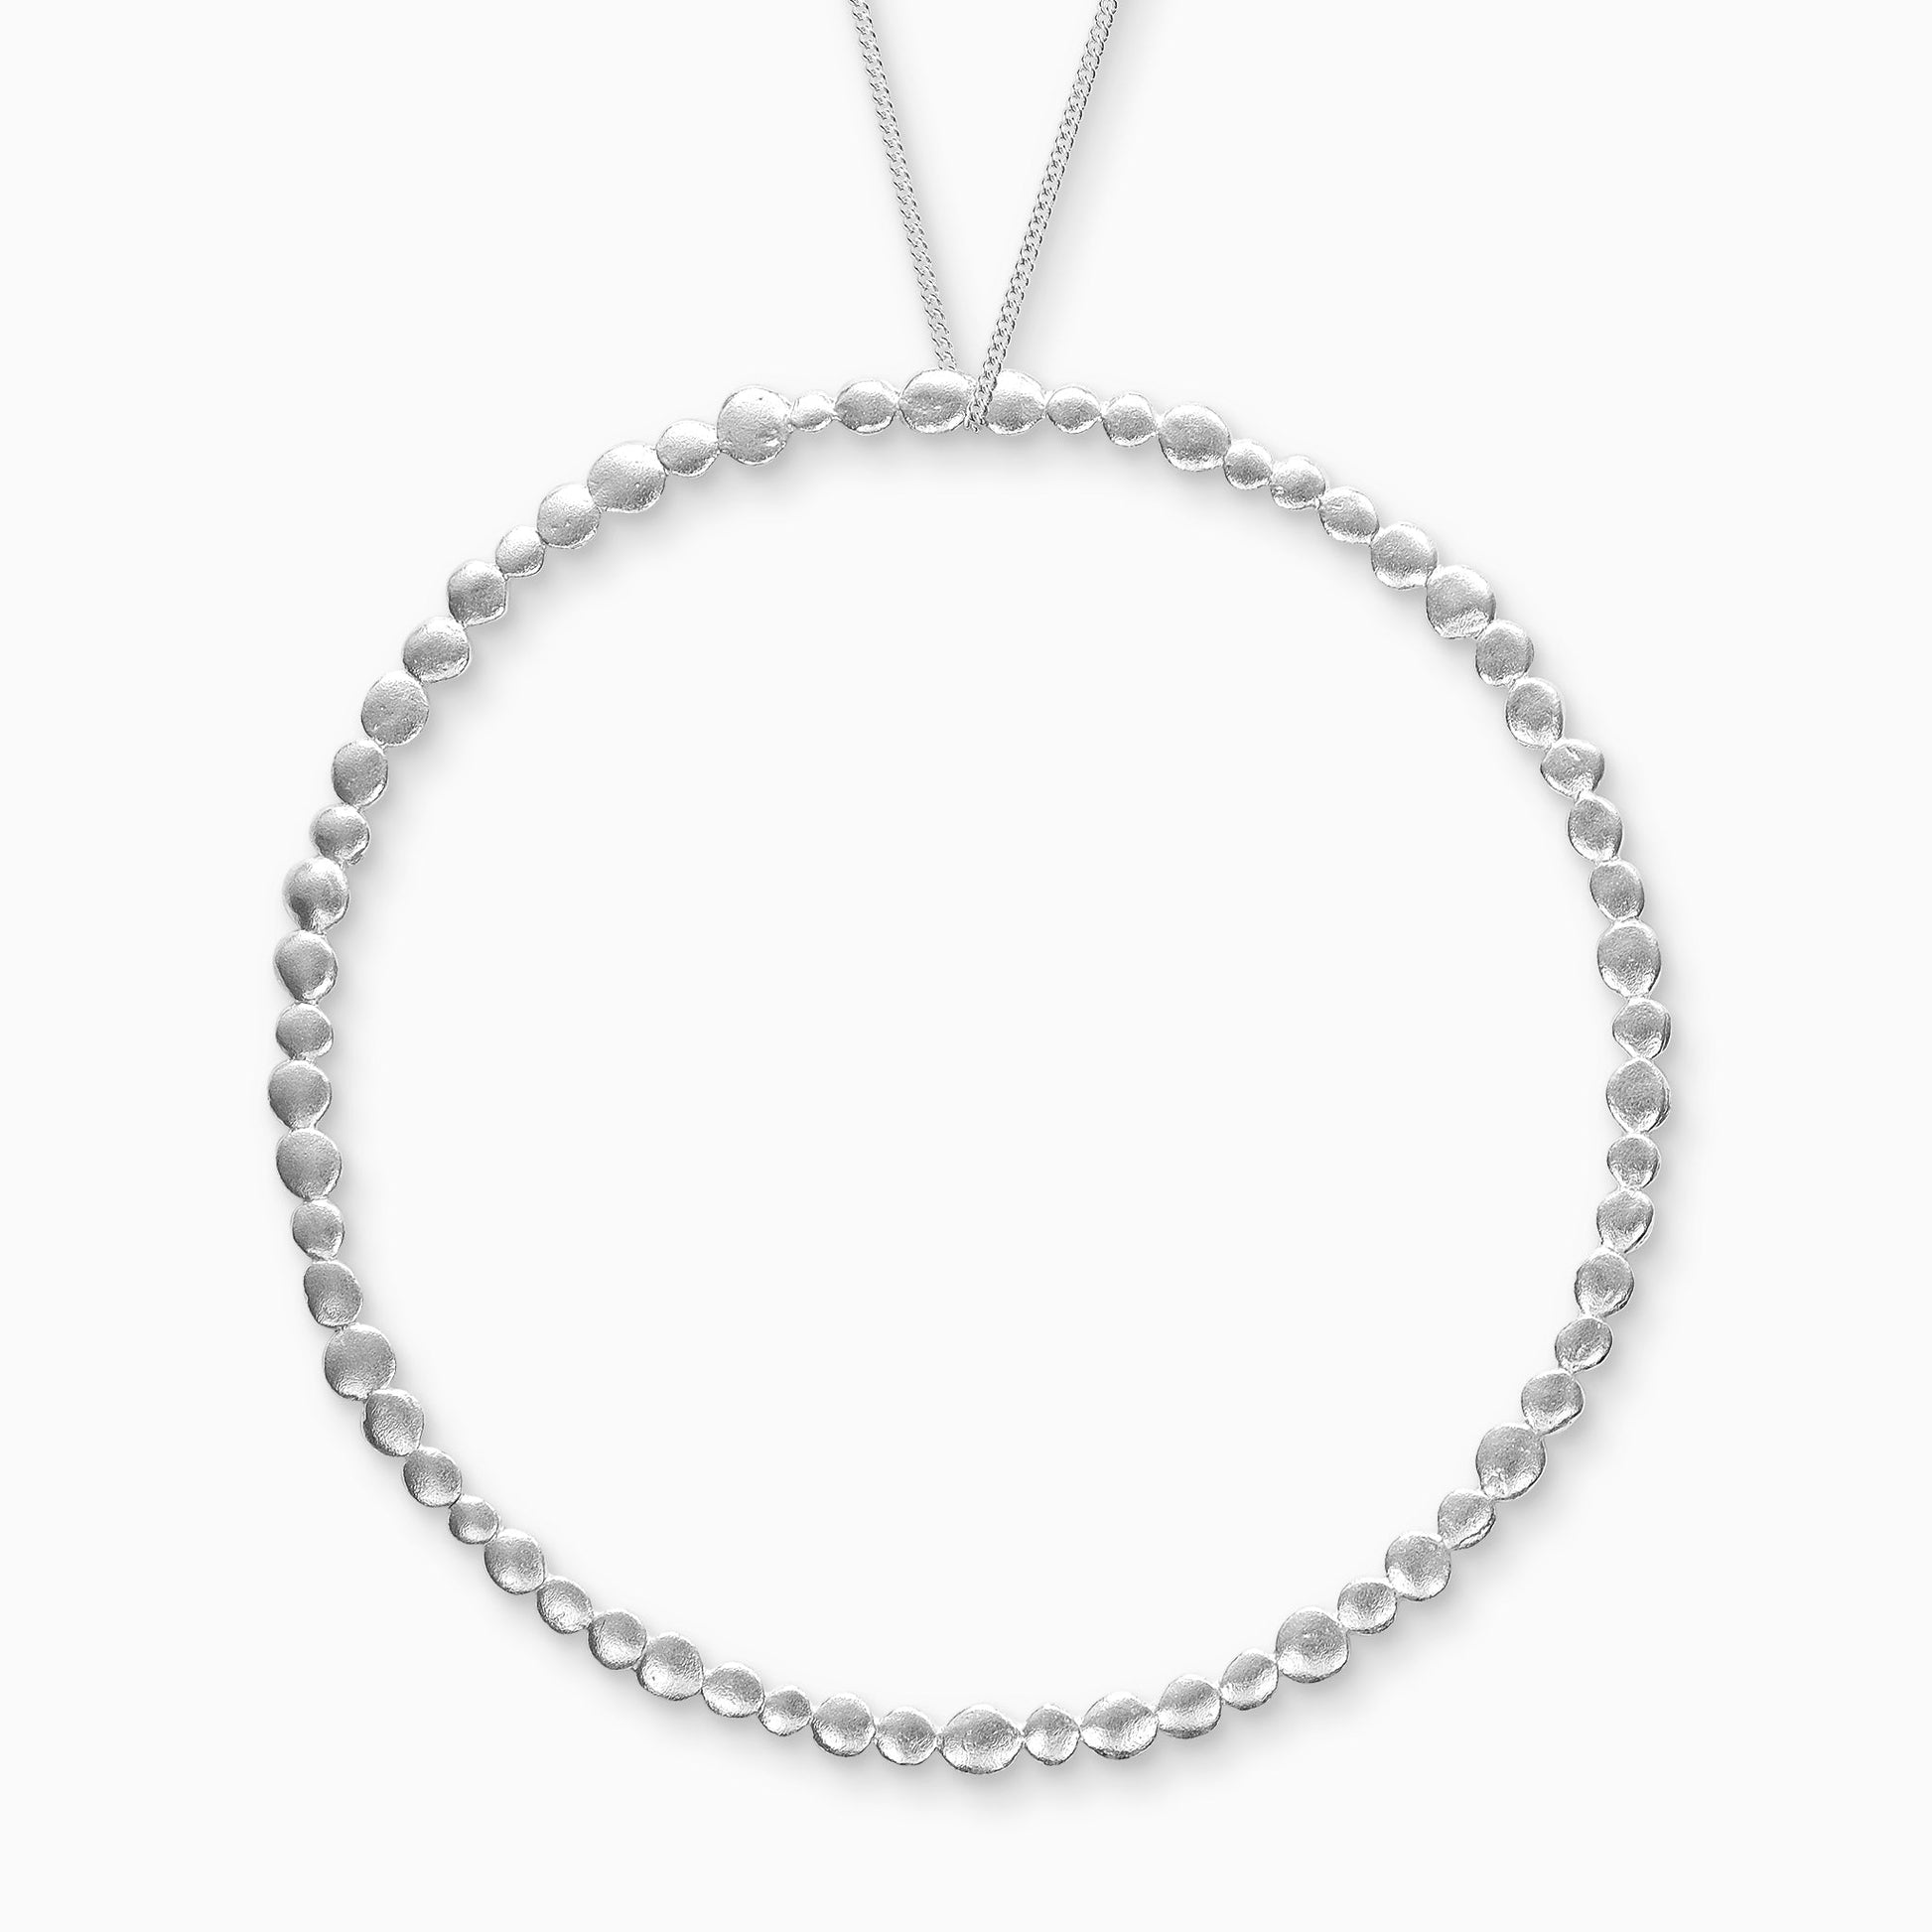 Recycled Silver pendant. A line of dainty textured dots of silver in varying sizes create a circular pendant 90mm in diameter.